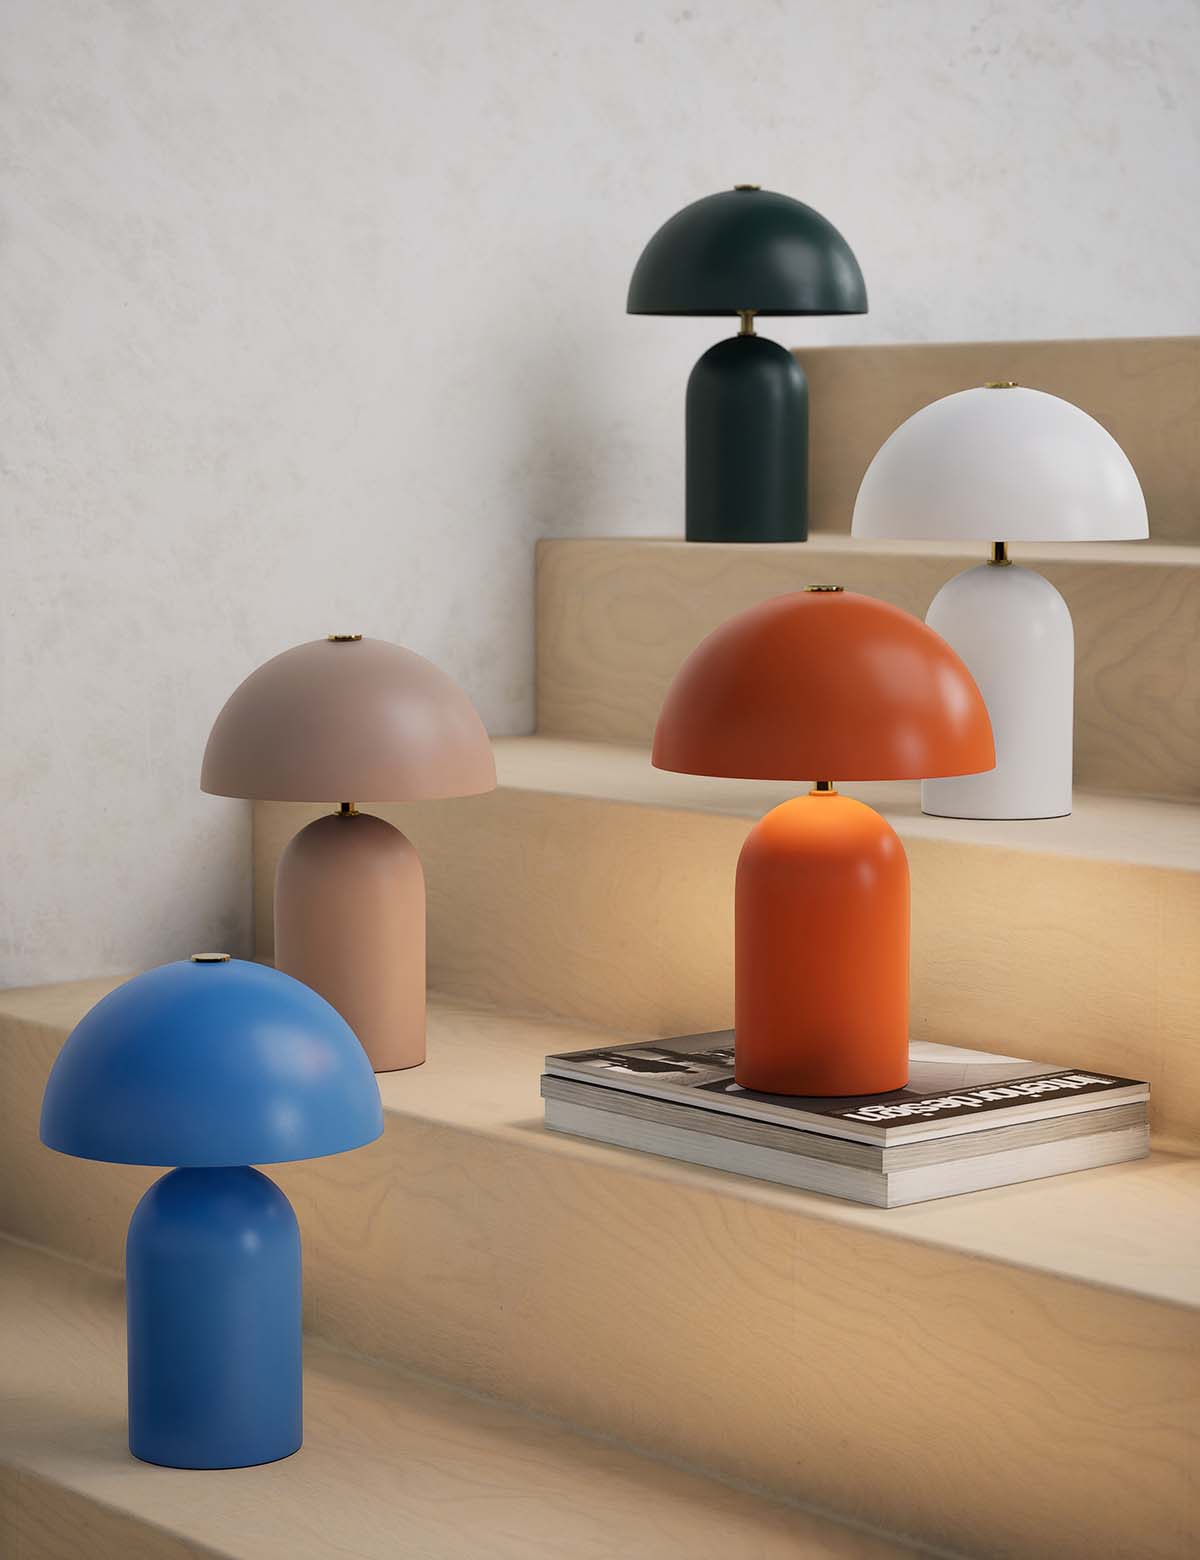 These M&S lamps will pack a punch in your home, bringing colour and mood lighting into every space.